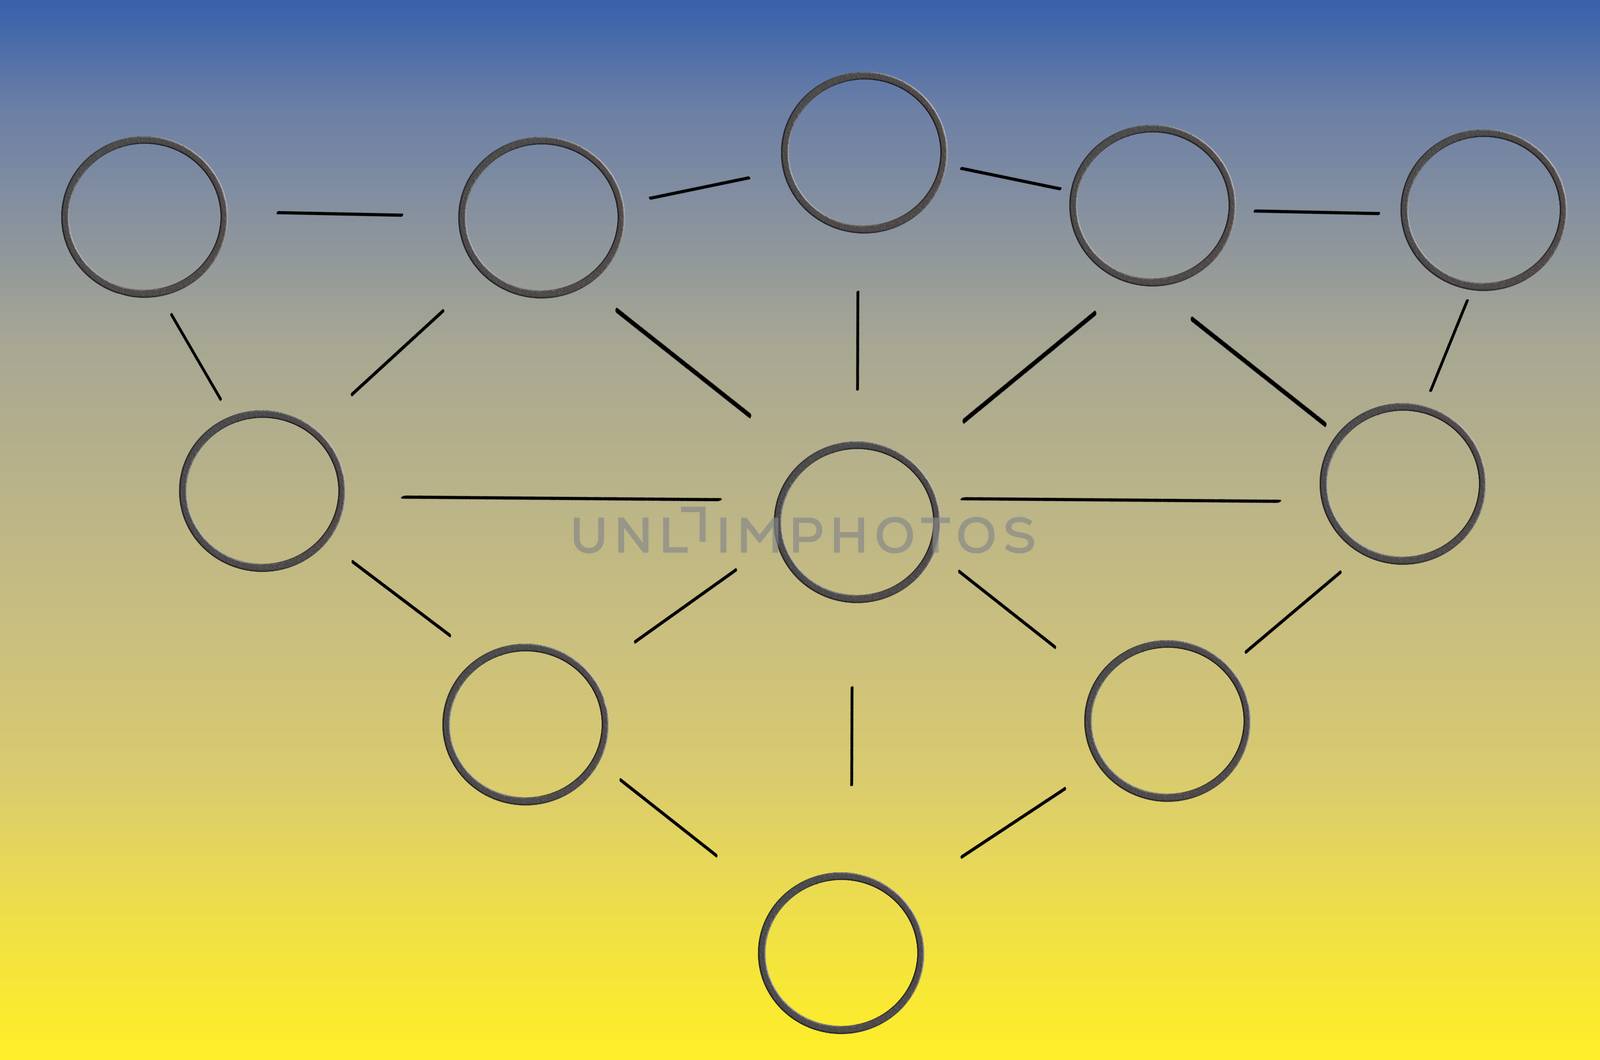 Various circuit connected with lines. Symbolizes network.